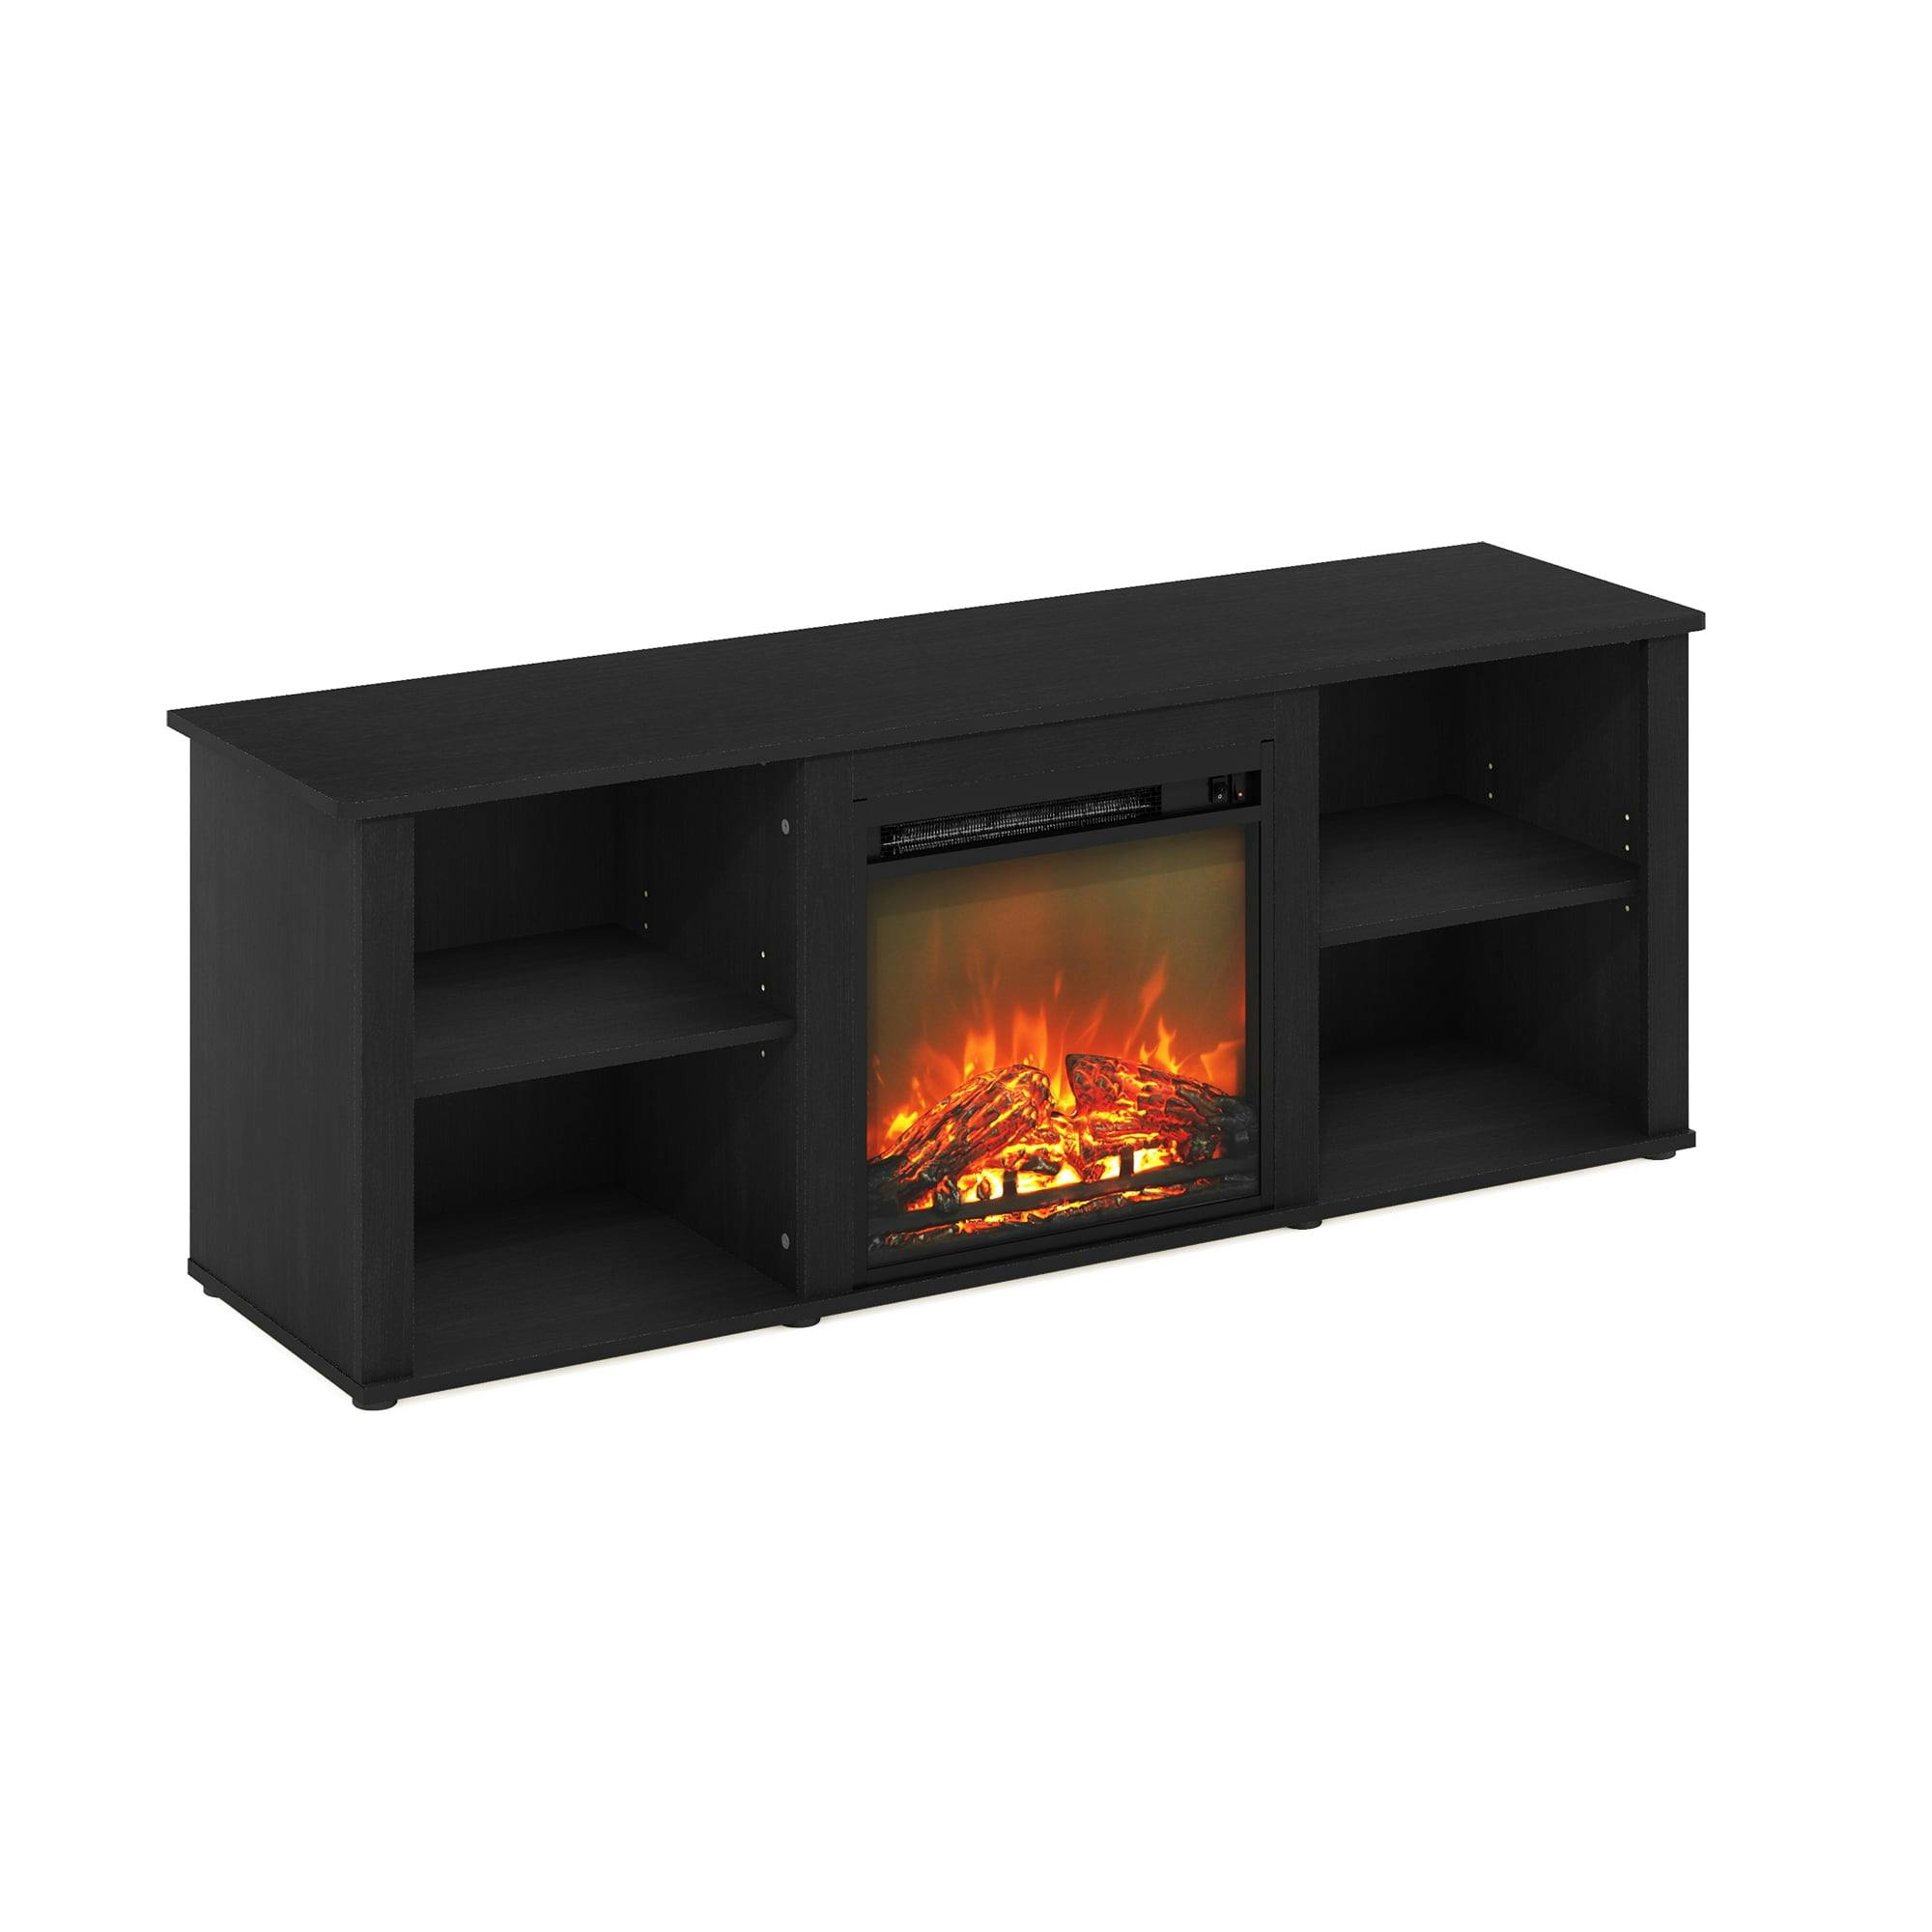 Americano Electric Fireplace TV Stand with Adjustable Shelves